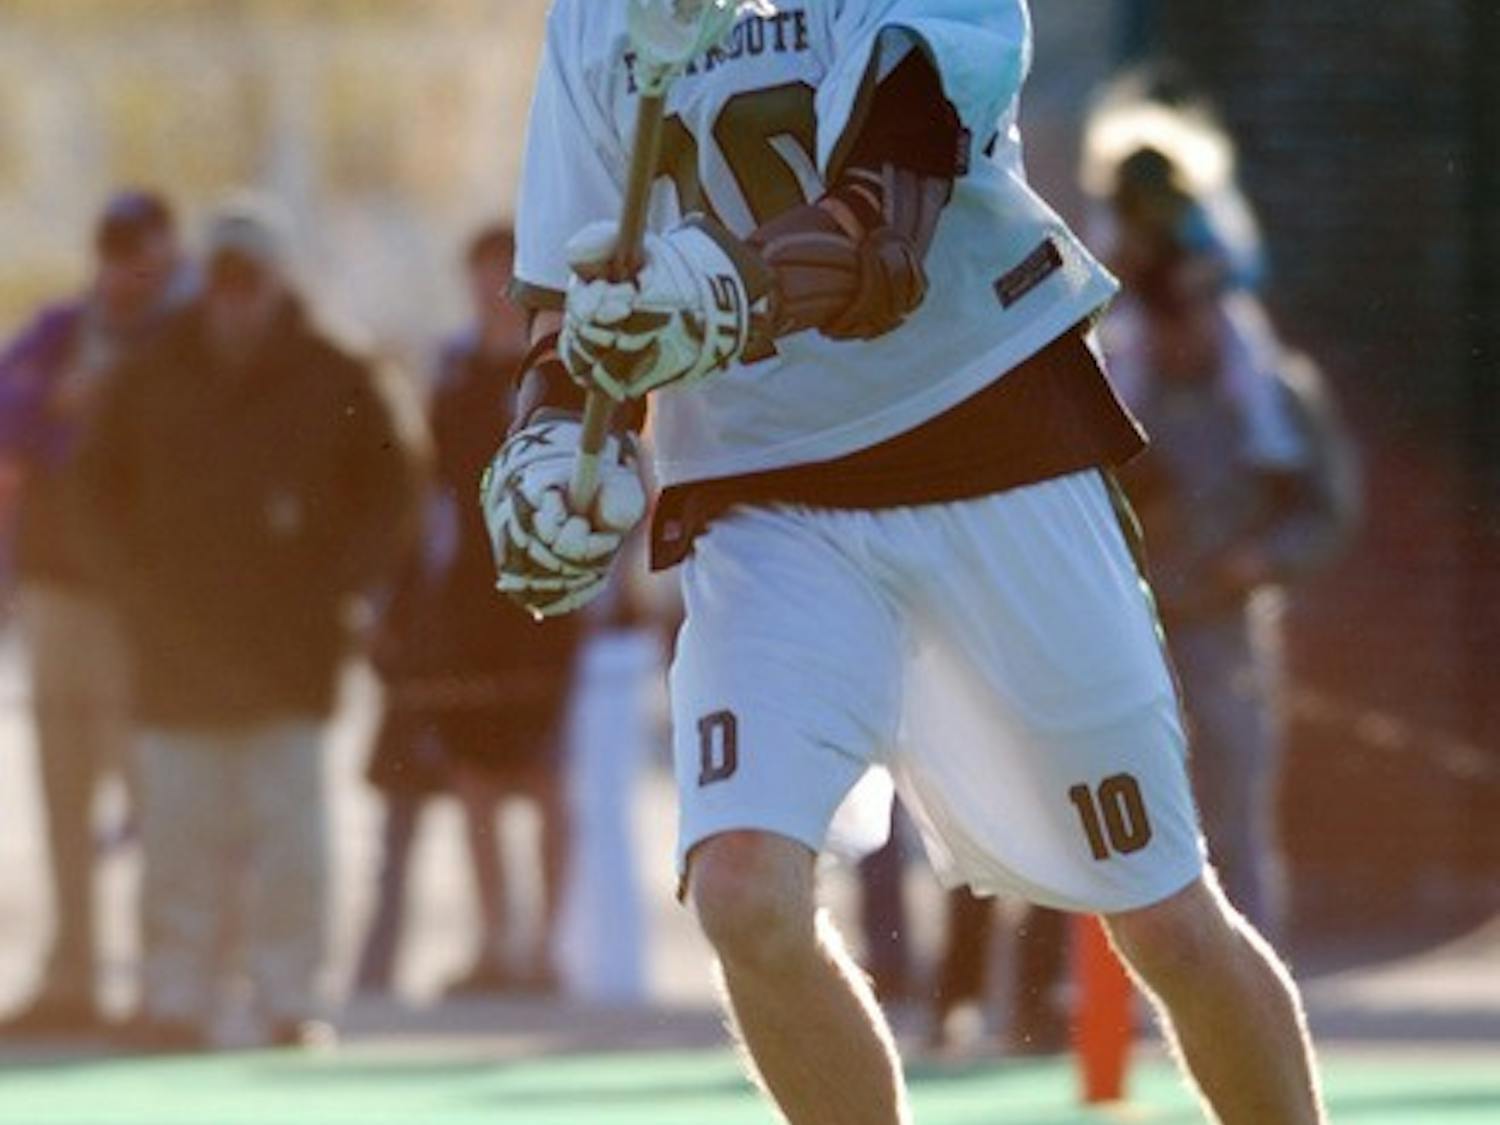 Brian Koch '09 was second on the team in goals for the season with 32.